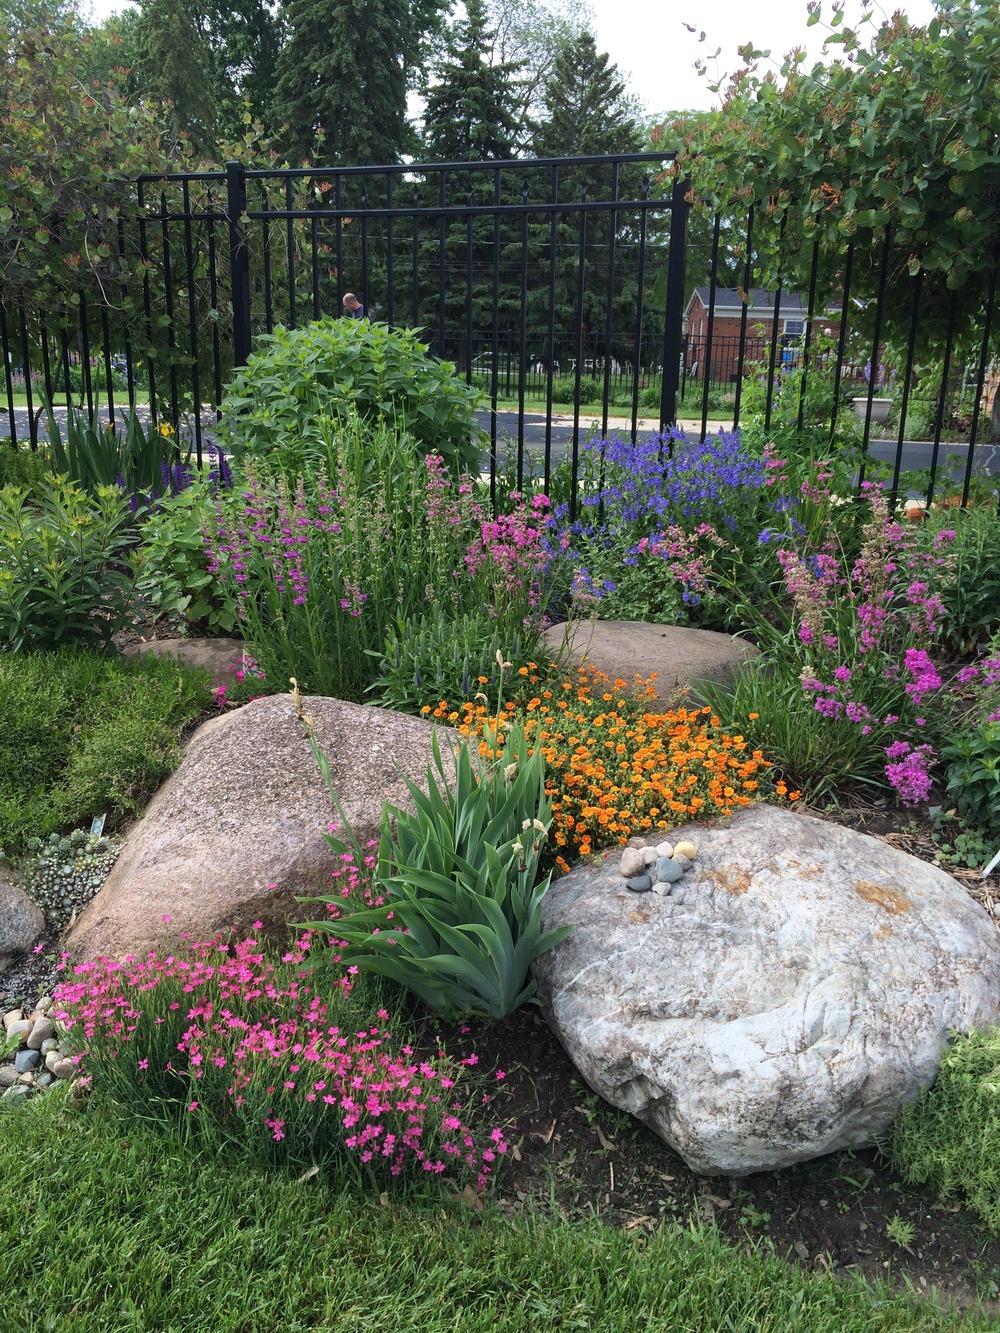 Landscaping with rocks: What to consider?